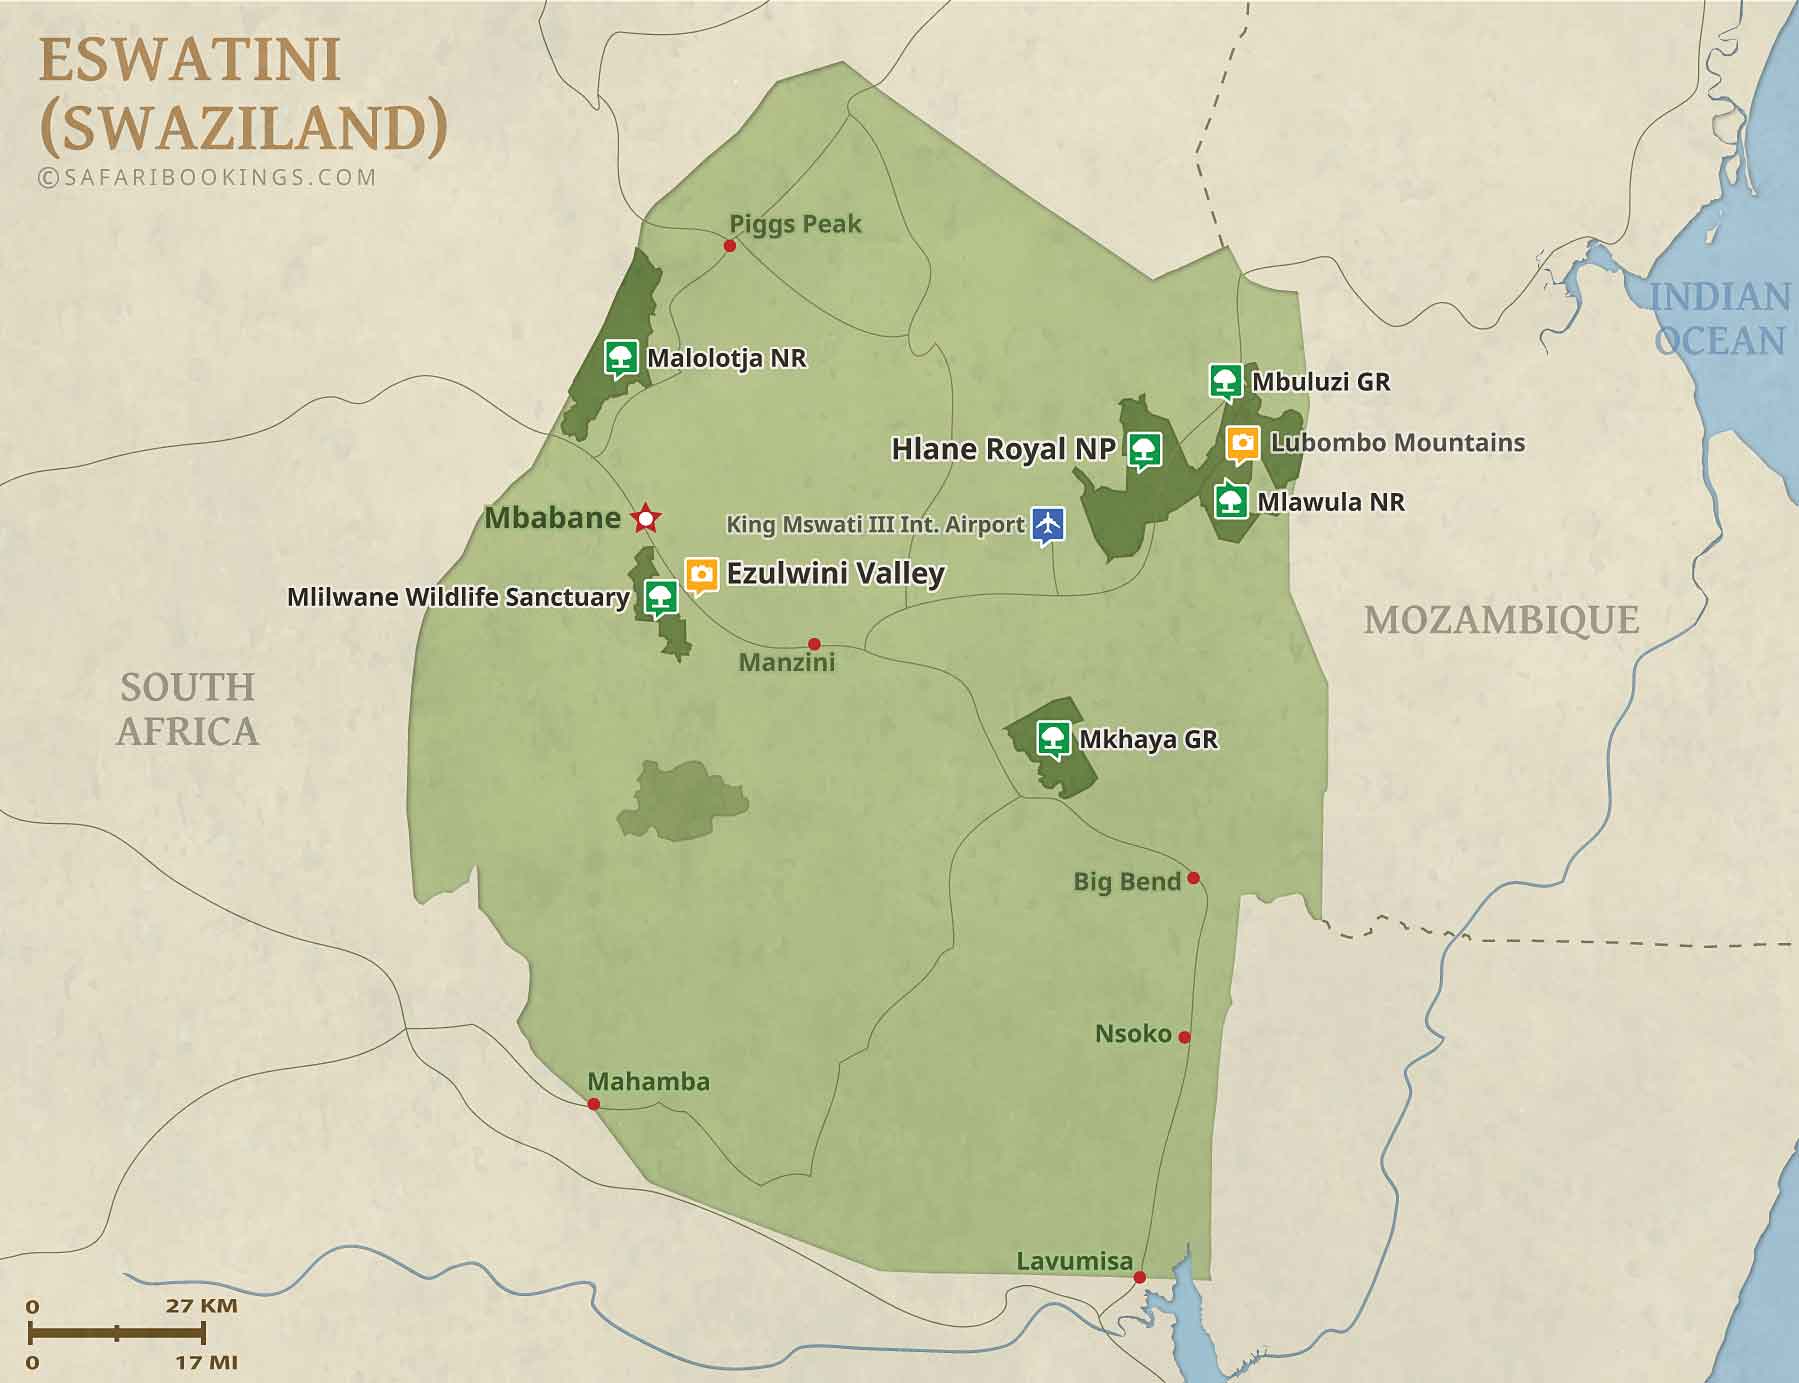 Detailed Map of Eswatini National Parks